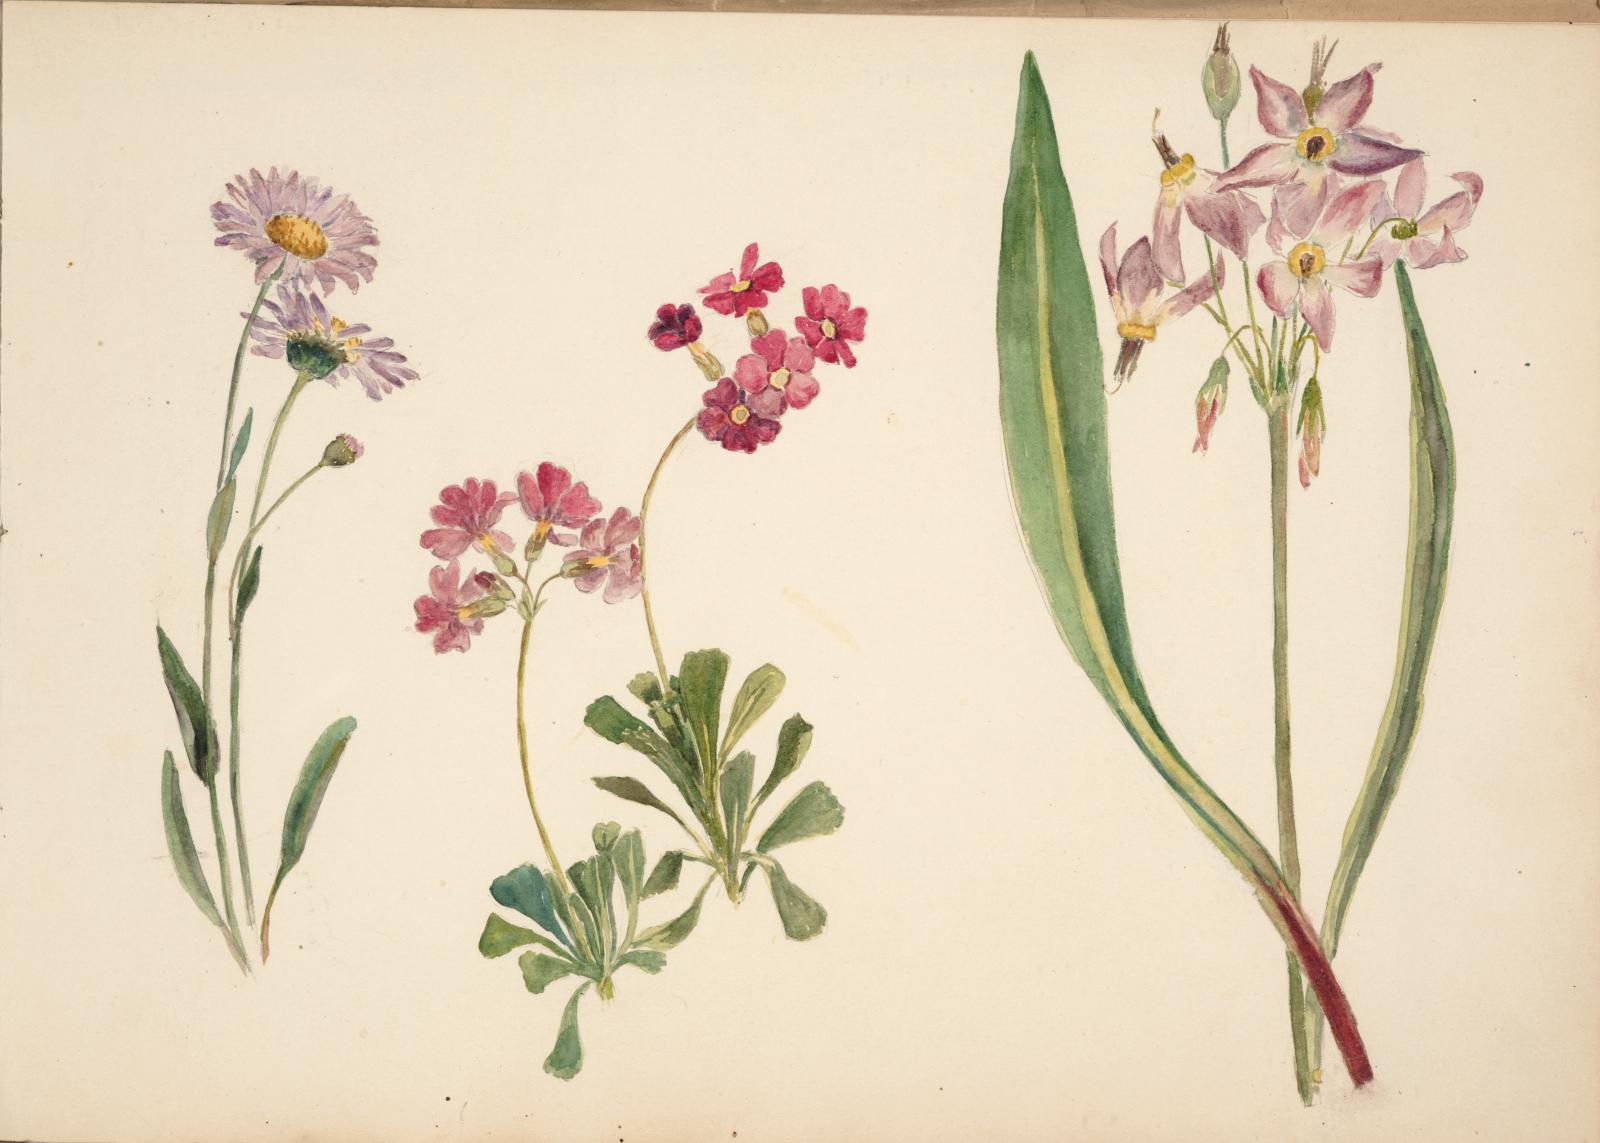 Color illustration of three plants. The first plant has two flowers with many small purple petals and a yellow center. The second plant has ten flowers, each with five red petals and a white center. The third plant has seven purple star-shaped flowers